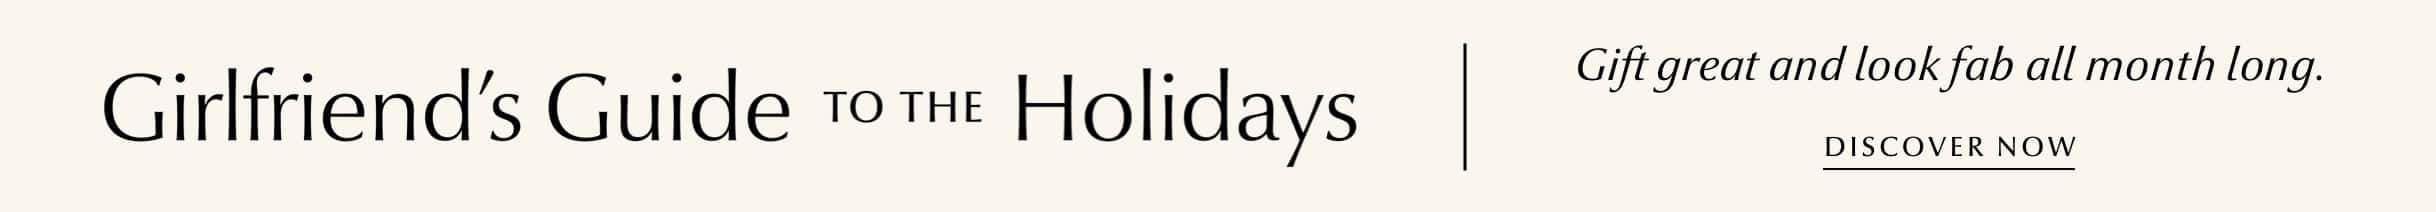 Girlfriend’s Guide to the Holidays - Discover Now